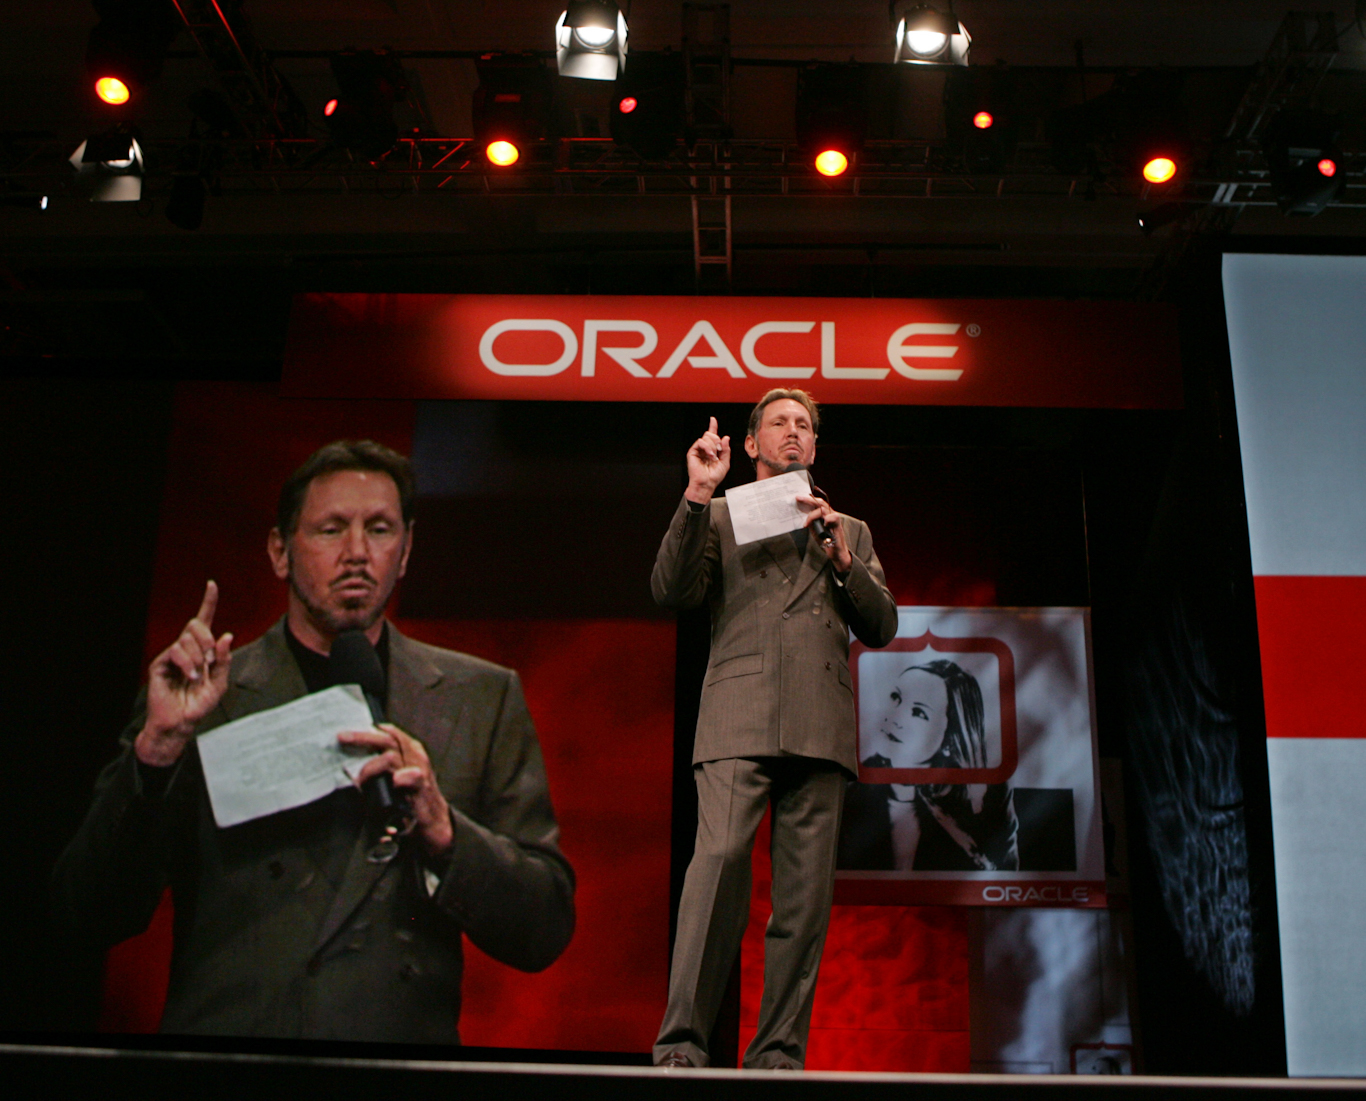 Larry Ellison gestures during a keynote address at the Oracle Open World Conference in 2005. Photo: Sakuma/AP.